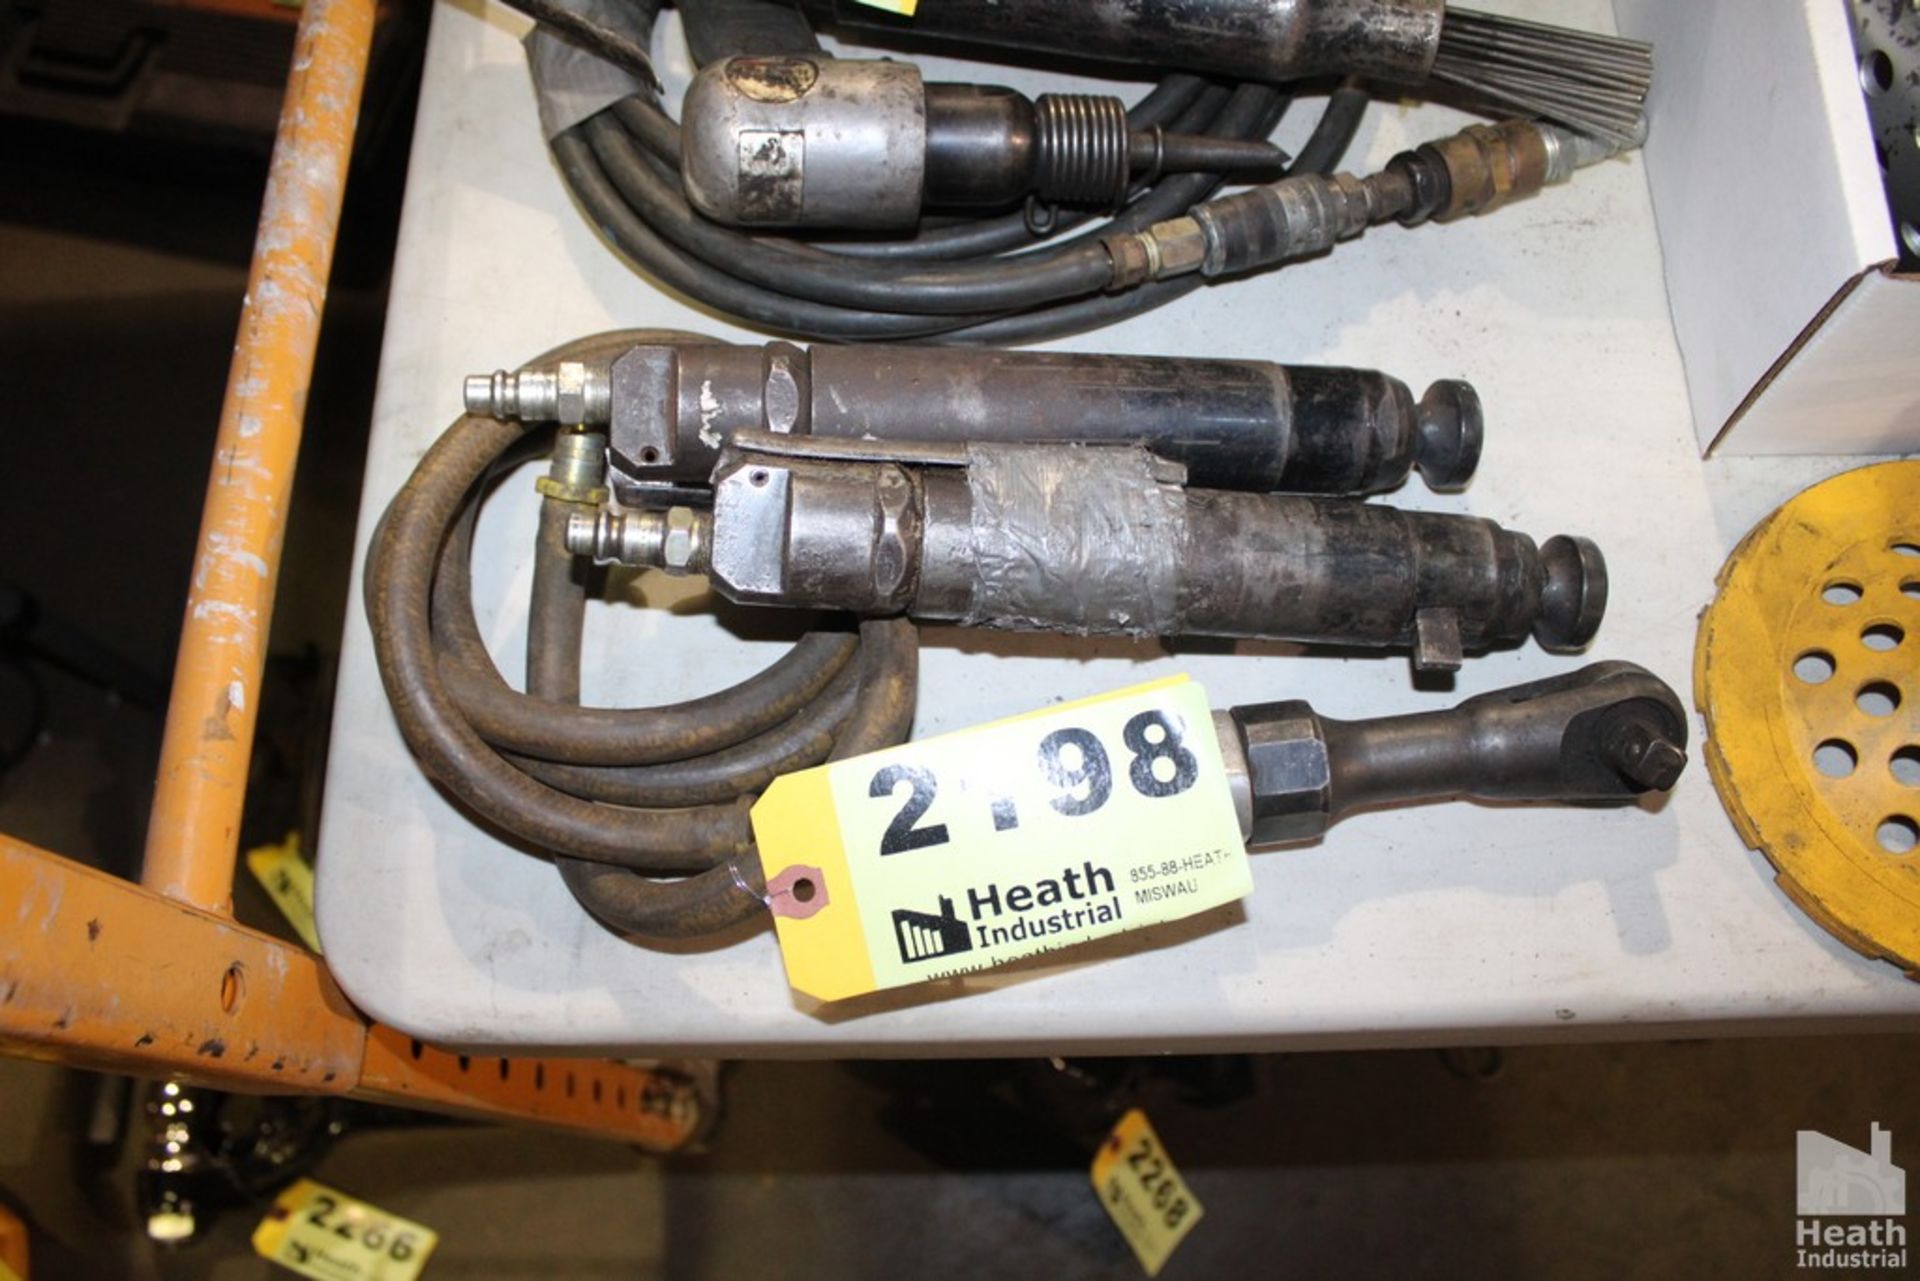 PNEUMATIC RATCHET AND TWO PNEUMATIC POUNDERS